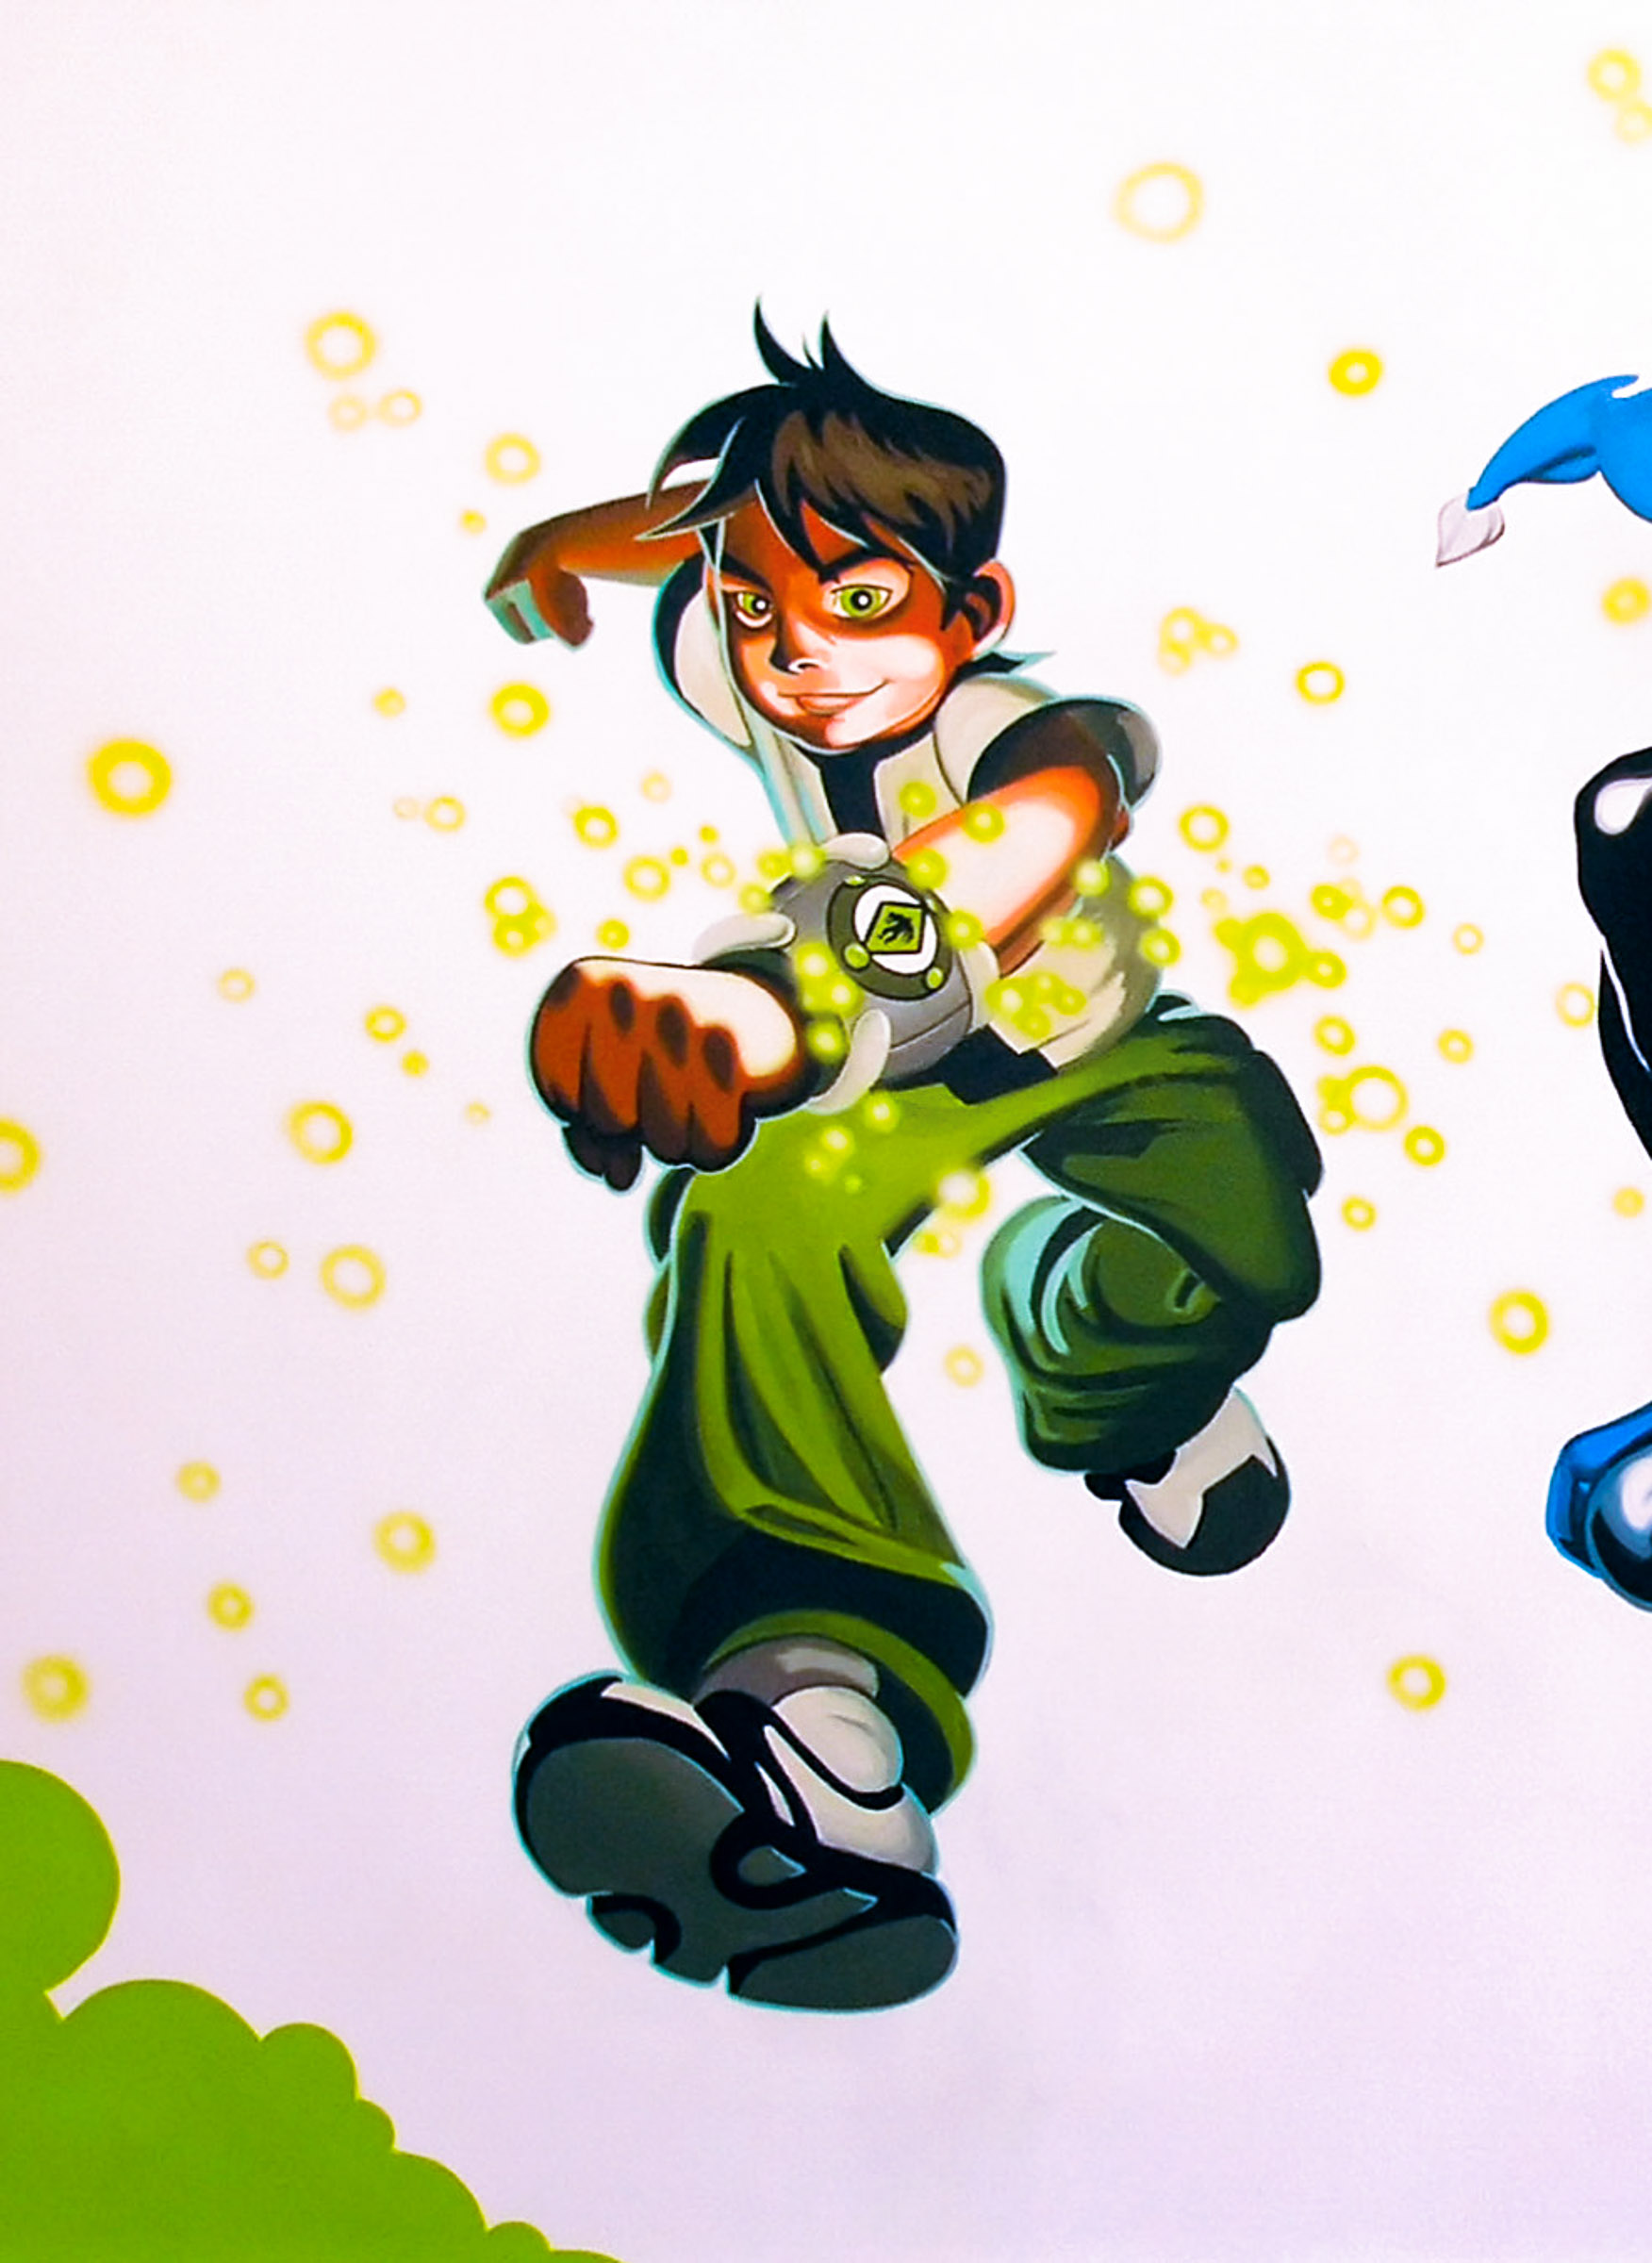 Ben 10 himself in this wall mural for boy's room